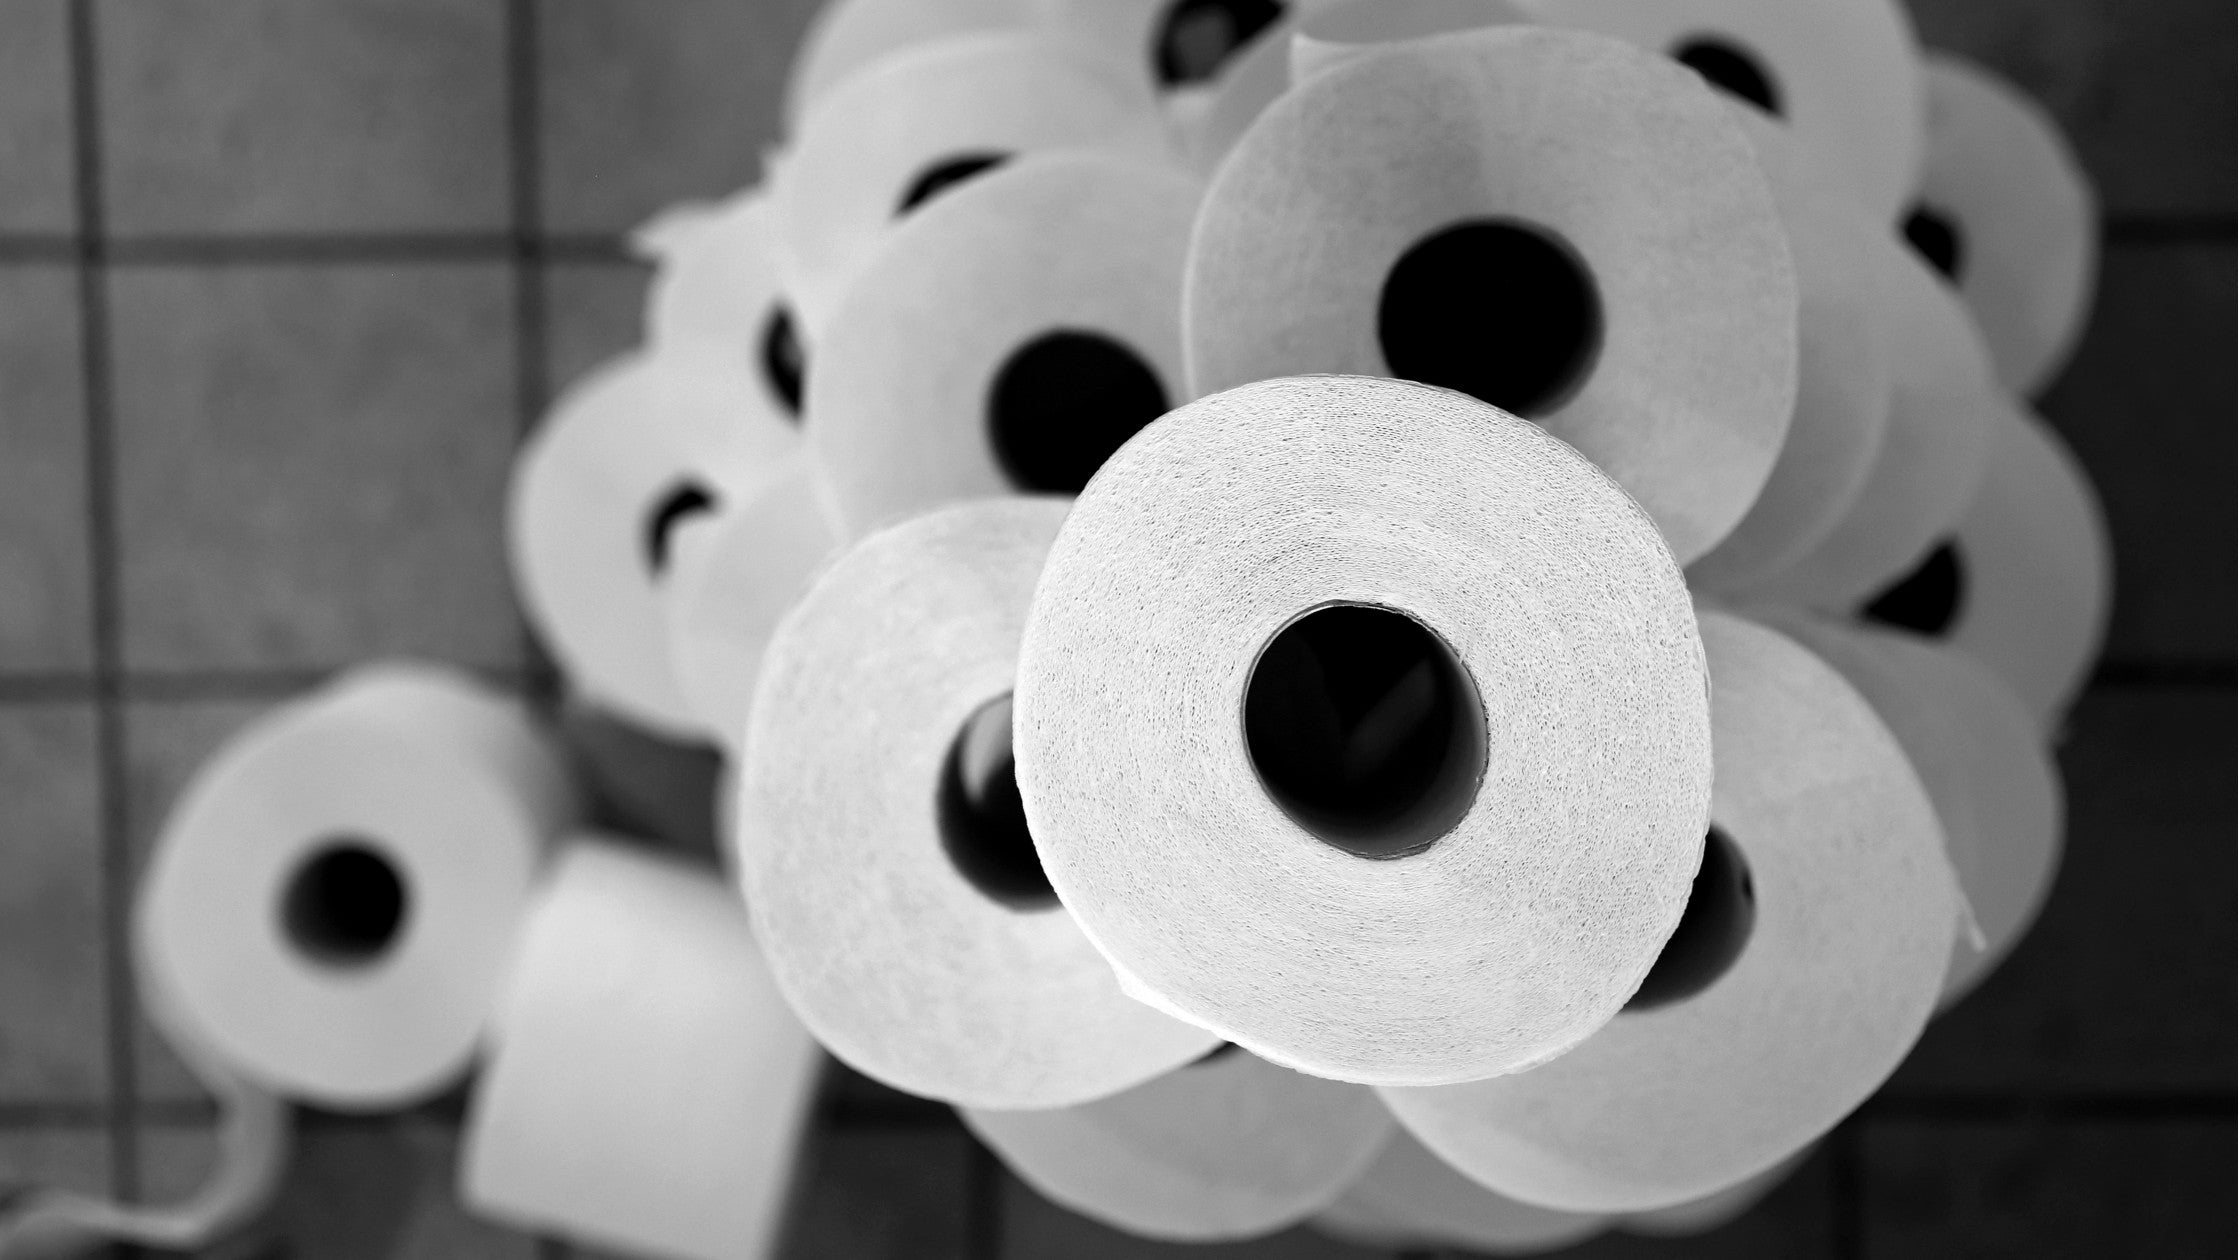 Why are Bleached Toilet Rolls Harmful?